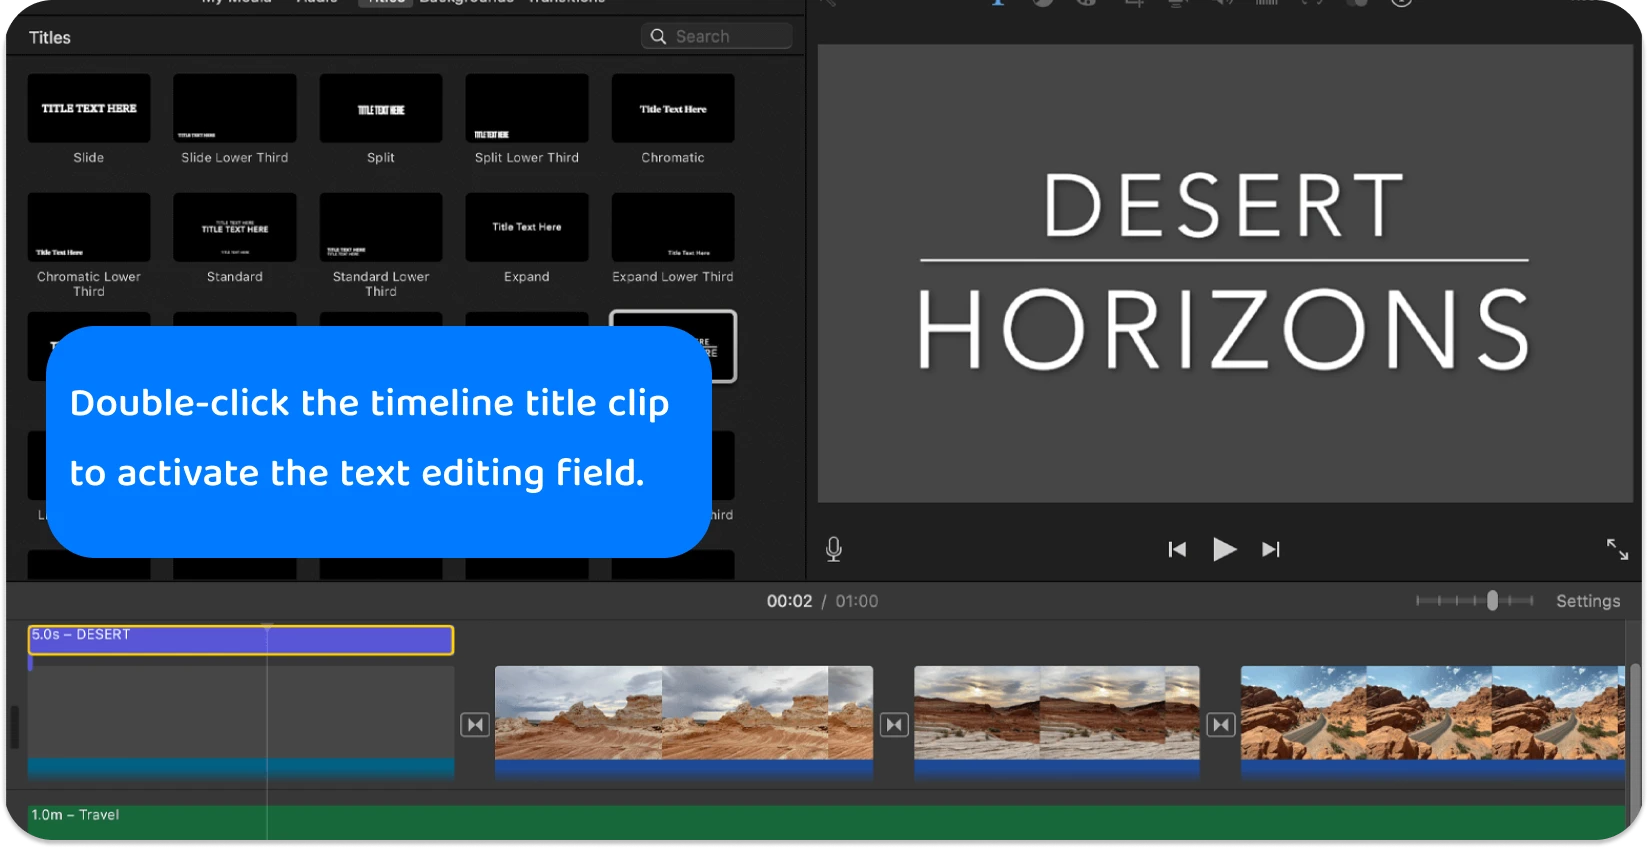 The iMovie Titles interface displaying a variety of text styles and formats for adding professional titles to video projects.
